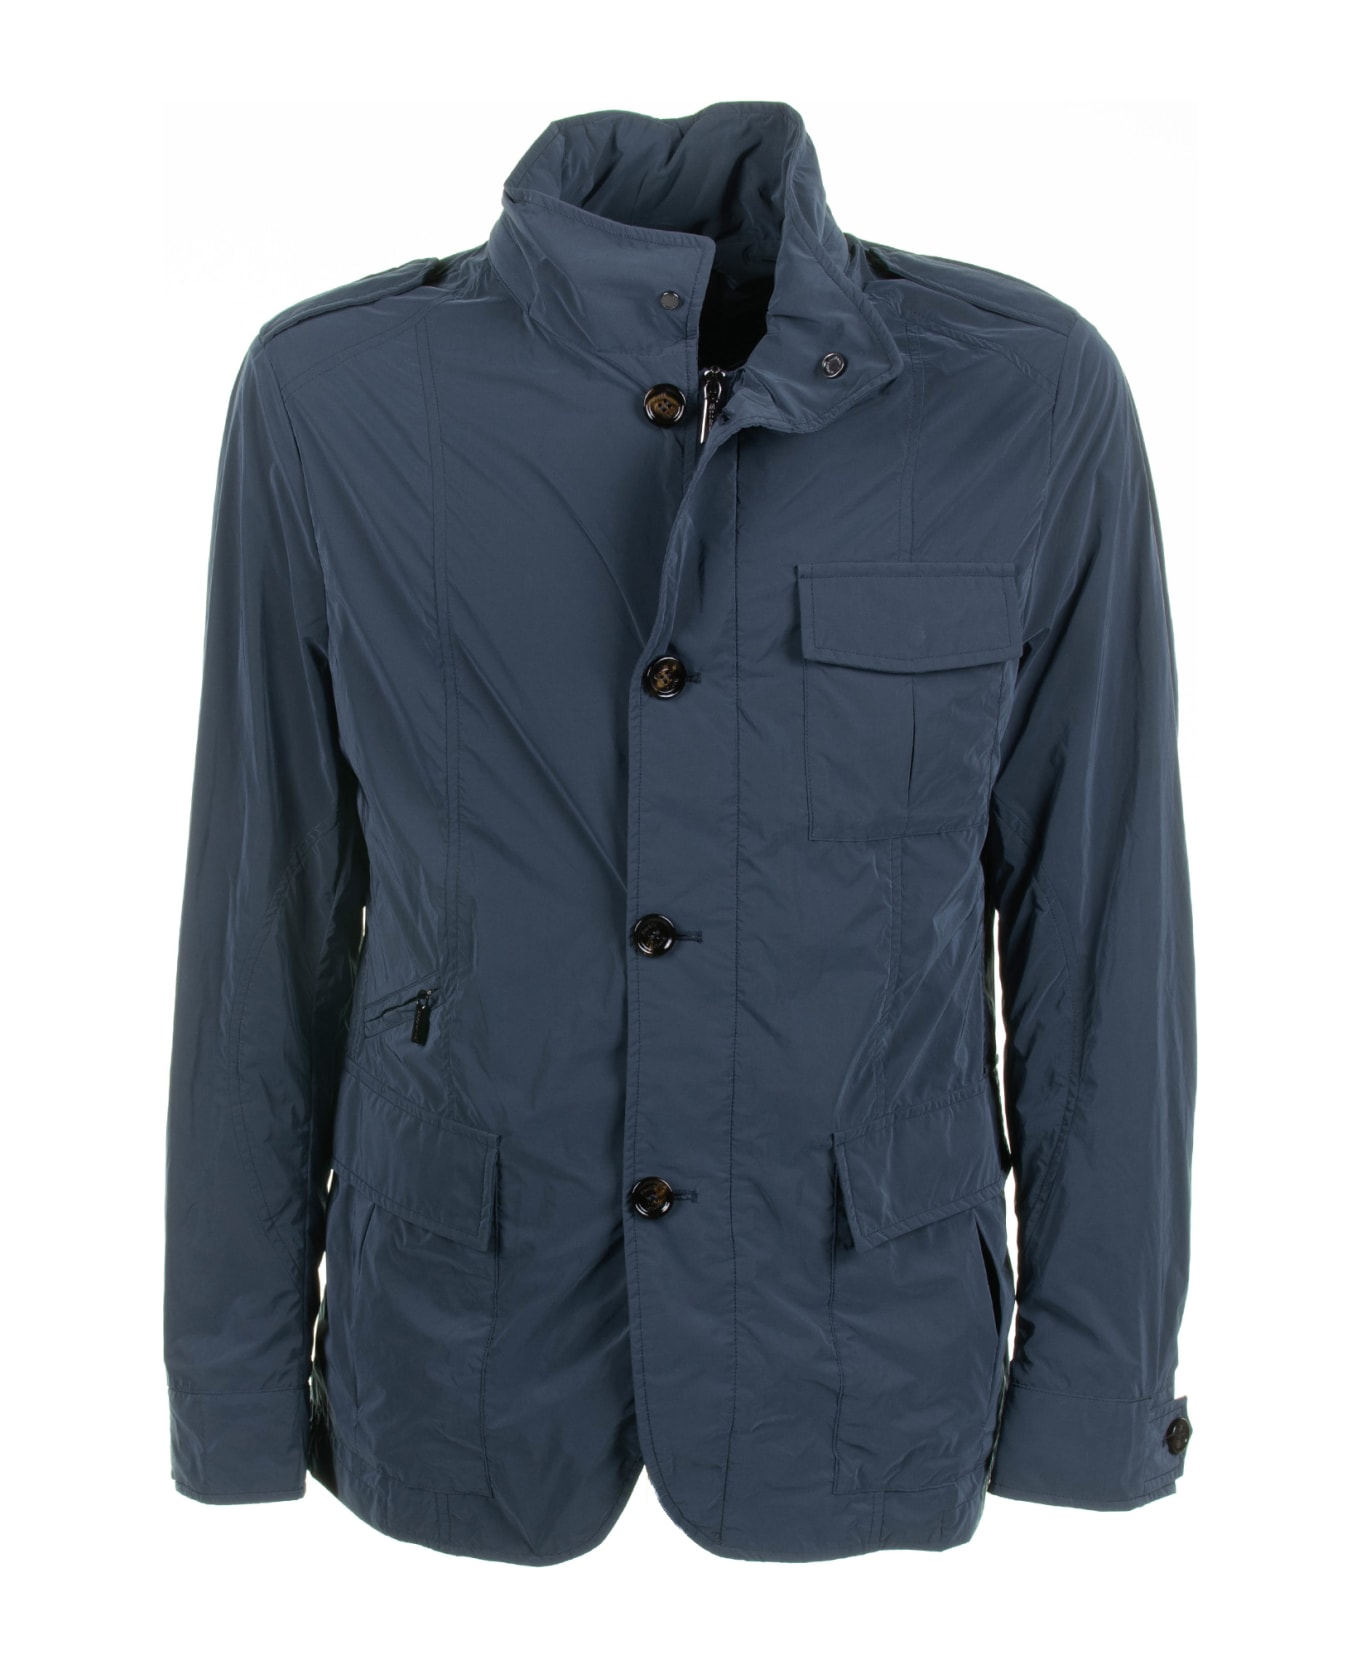 Moorer Spring Jacket With Pockets And Buttons - DENIM